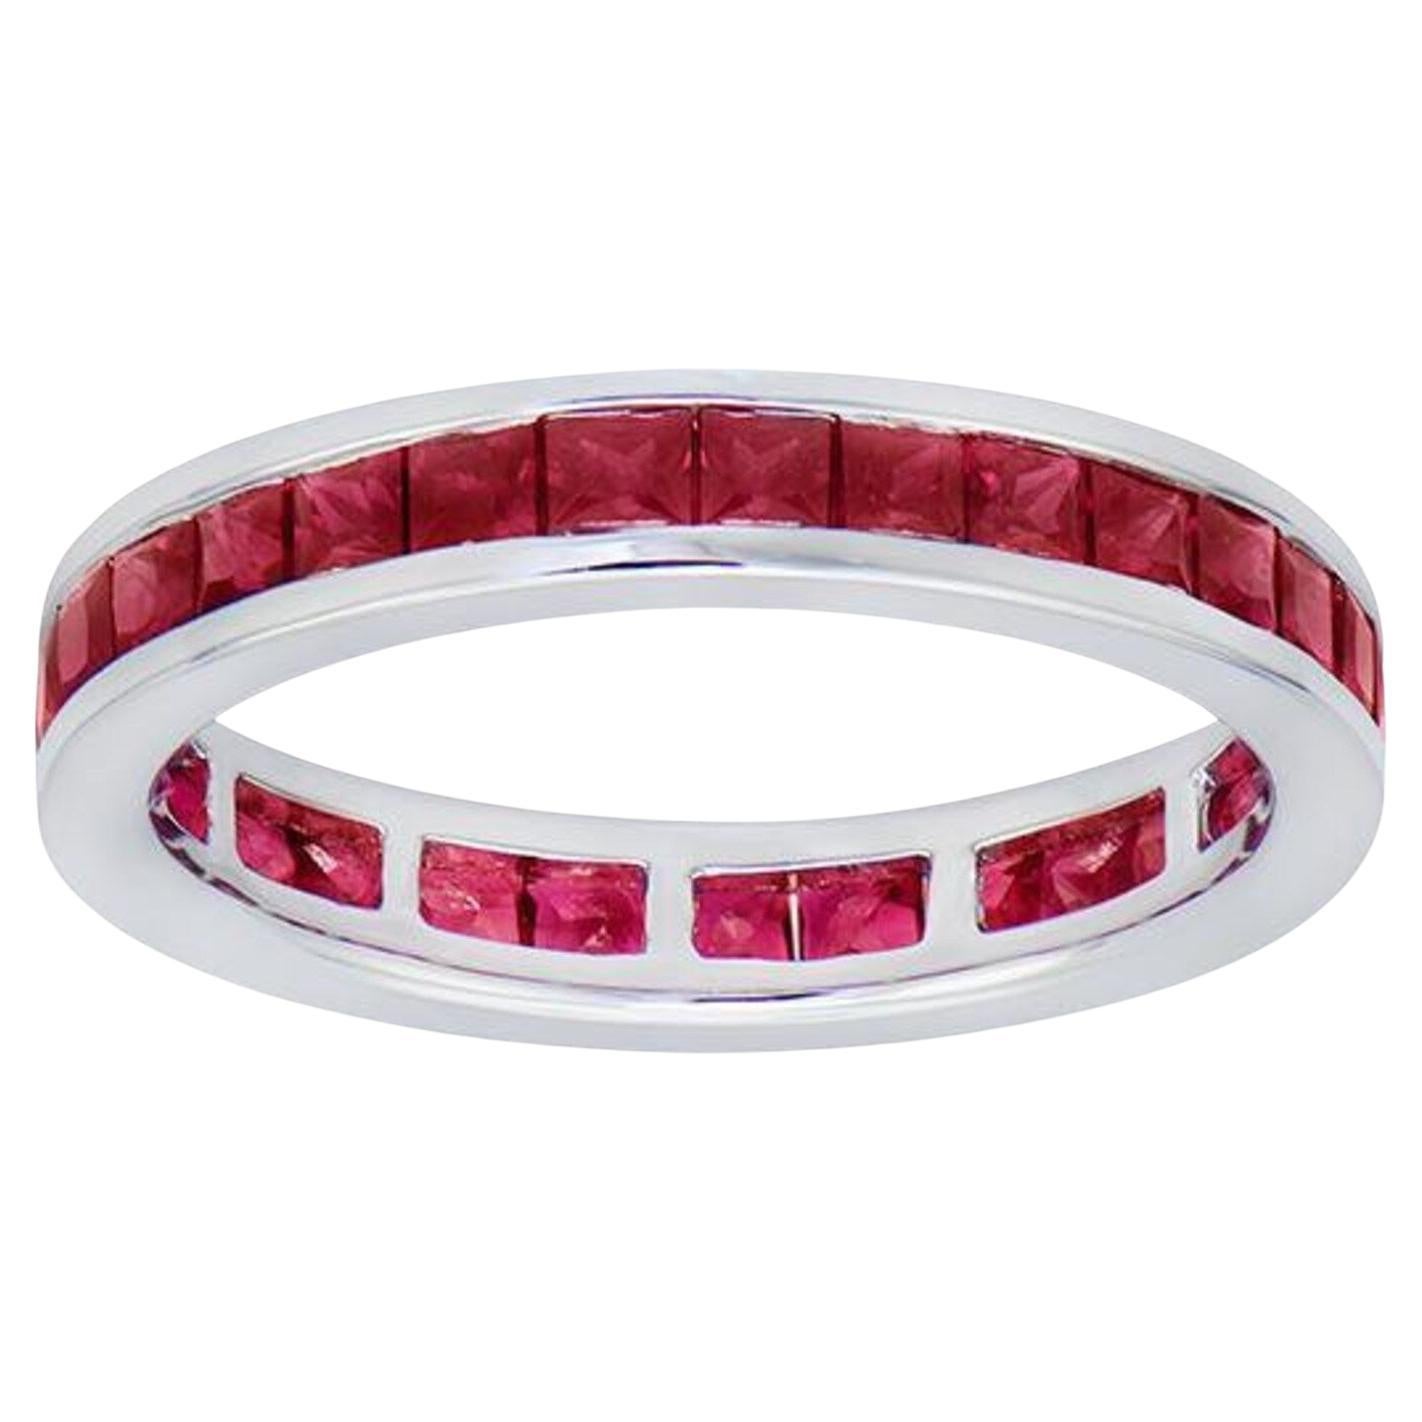 2.28 Carat Channel Set Ruby Band in 18K White Gold

This unique ruby band features elegant rubies in a simple channel setting that allows their beauty to be the focus. This ring is handcrafted in New York City by our expert jewelers.
-18K White